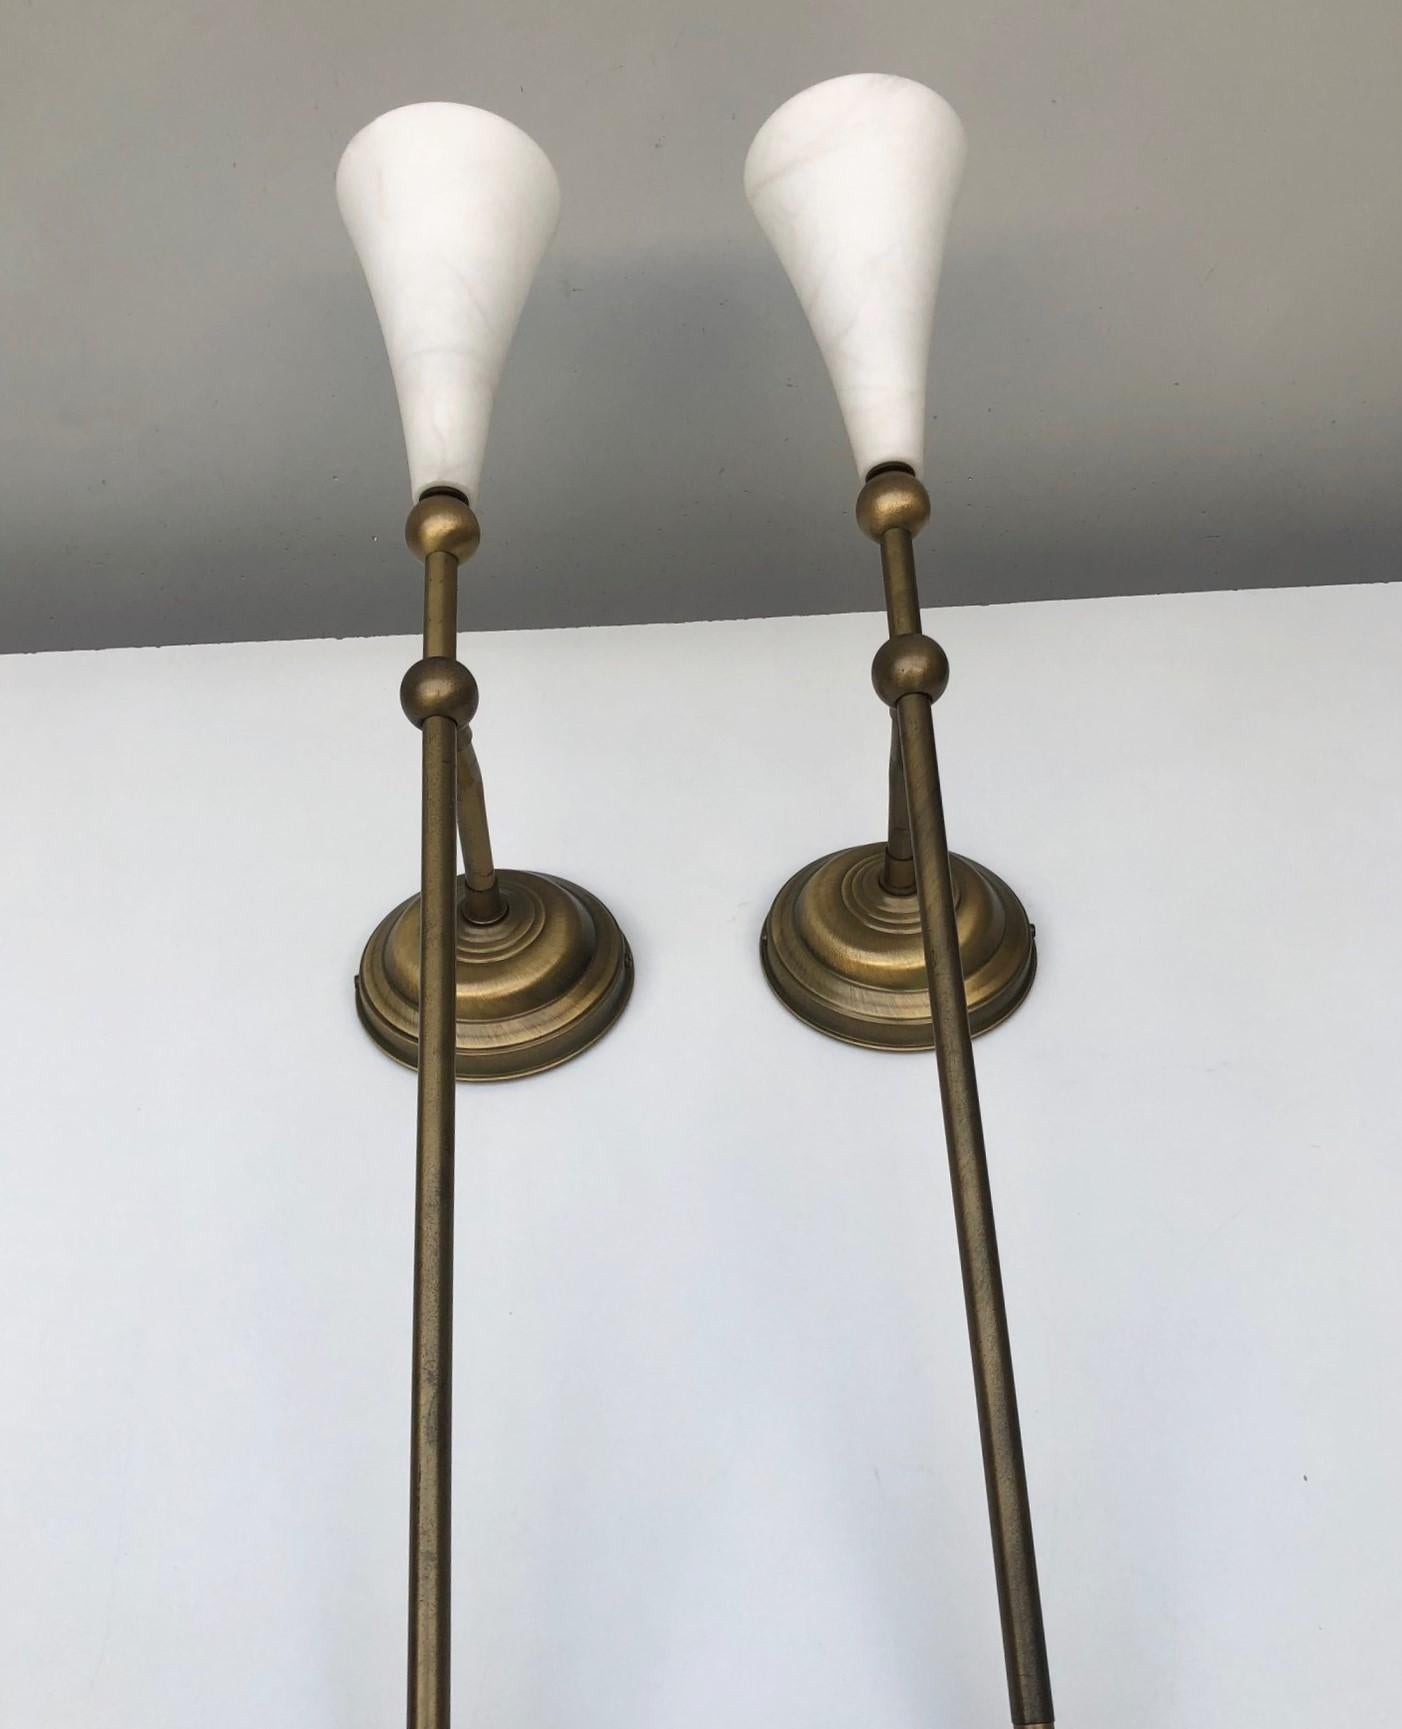 Pair of tall Art Deco torchiere wall sconces, France 1930s. Very elegant design made of bronzed brass with conical white alabaster shades. Each sconce takes one Edison E14 candelabra screw bulb. 
In very good vintage condition, no damages, beautiful